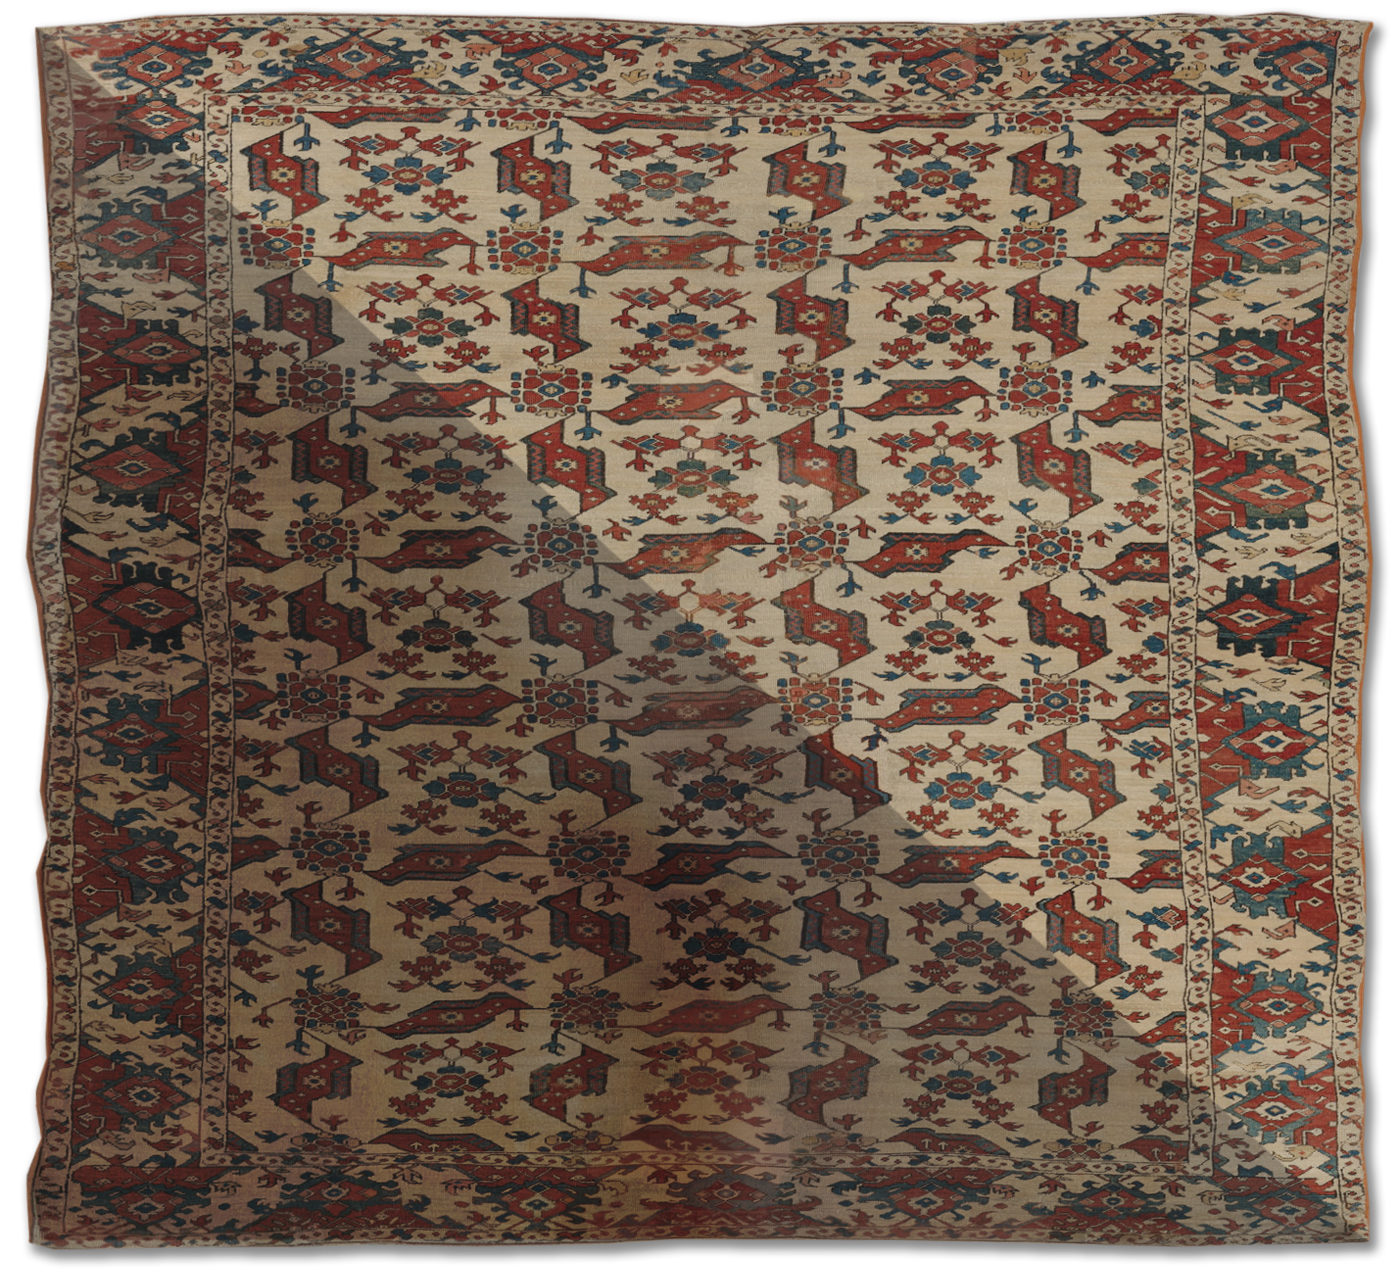 Rug example before after